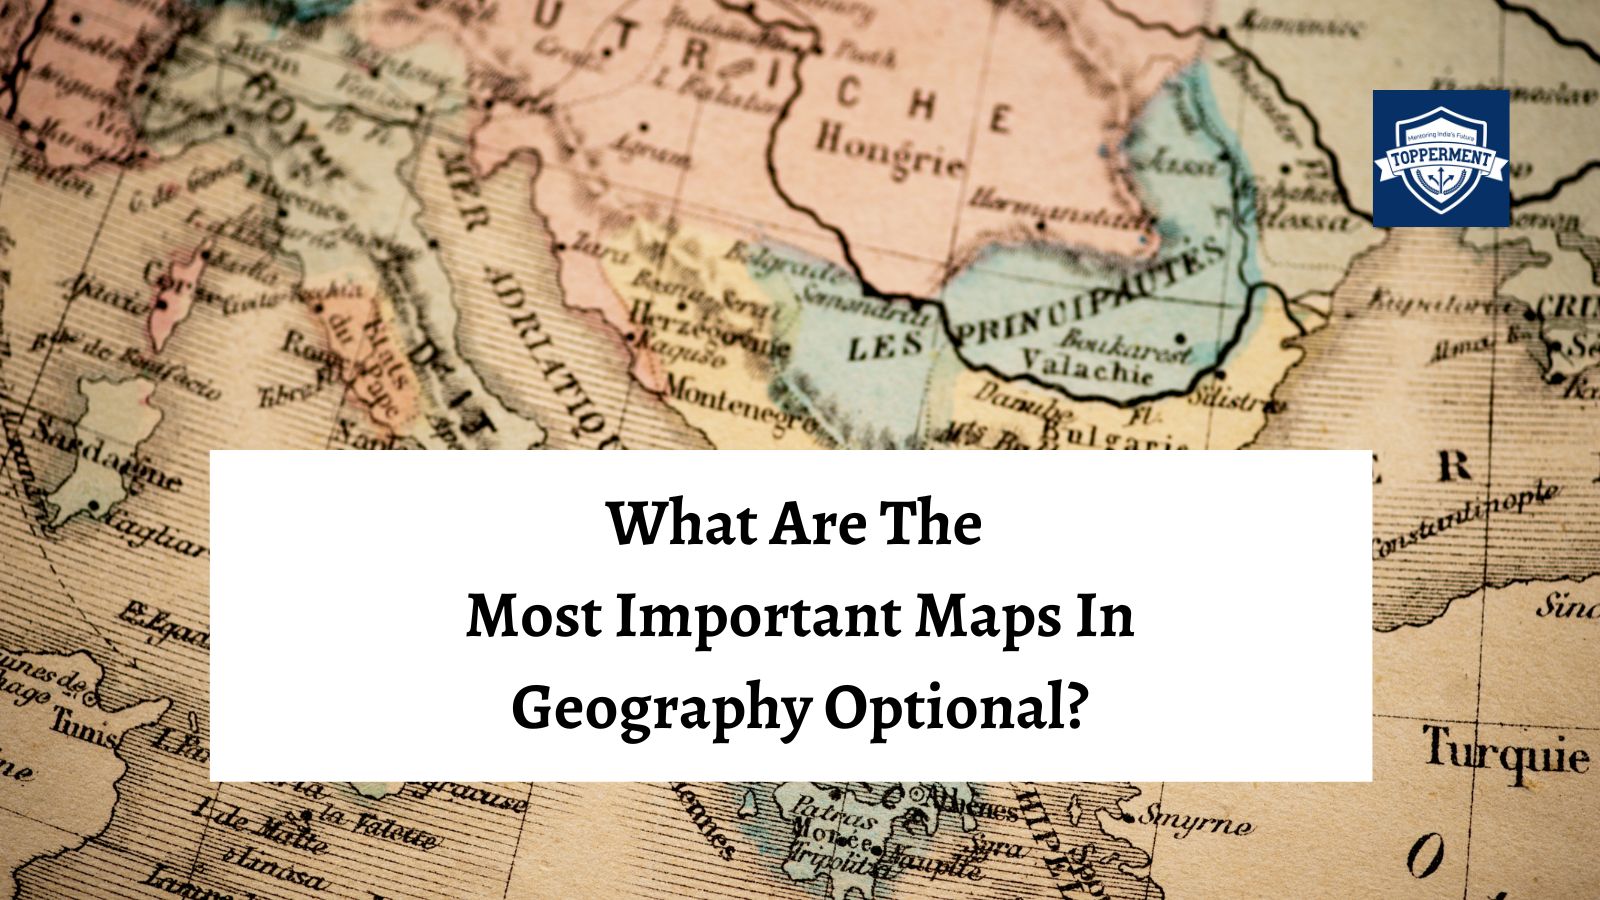 What Are The Most Important Maps For UPSC Geography Optional? | Best UPSC IAS Coaching For Mentorship And Guidance